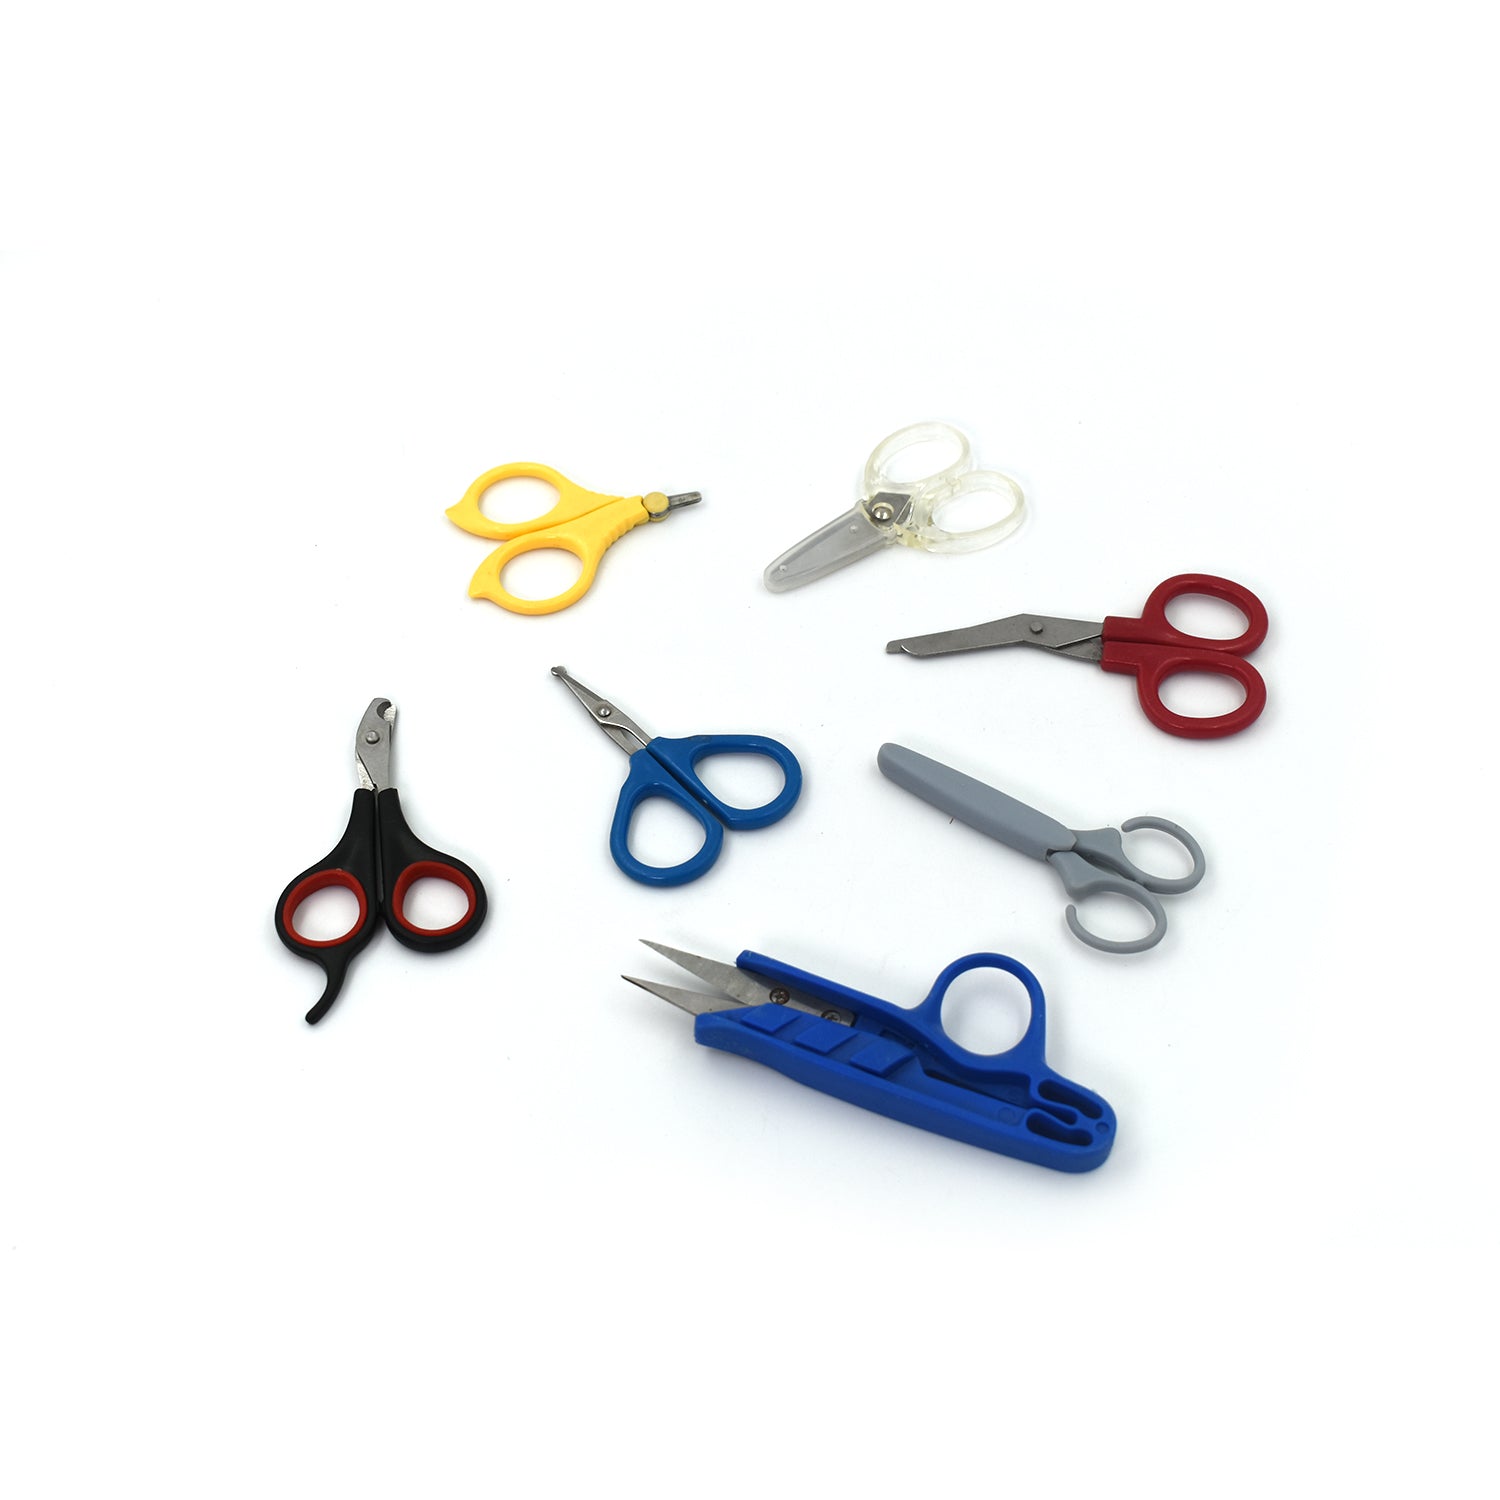 7626 mini scissors for cutting and designing purposes by student and all etc. 